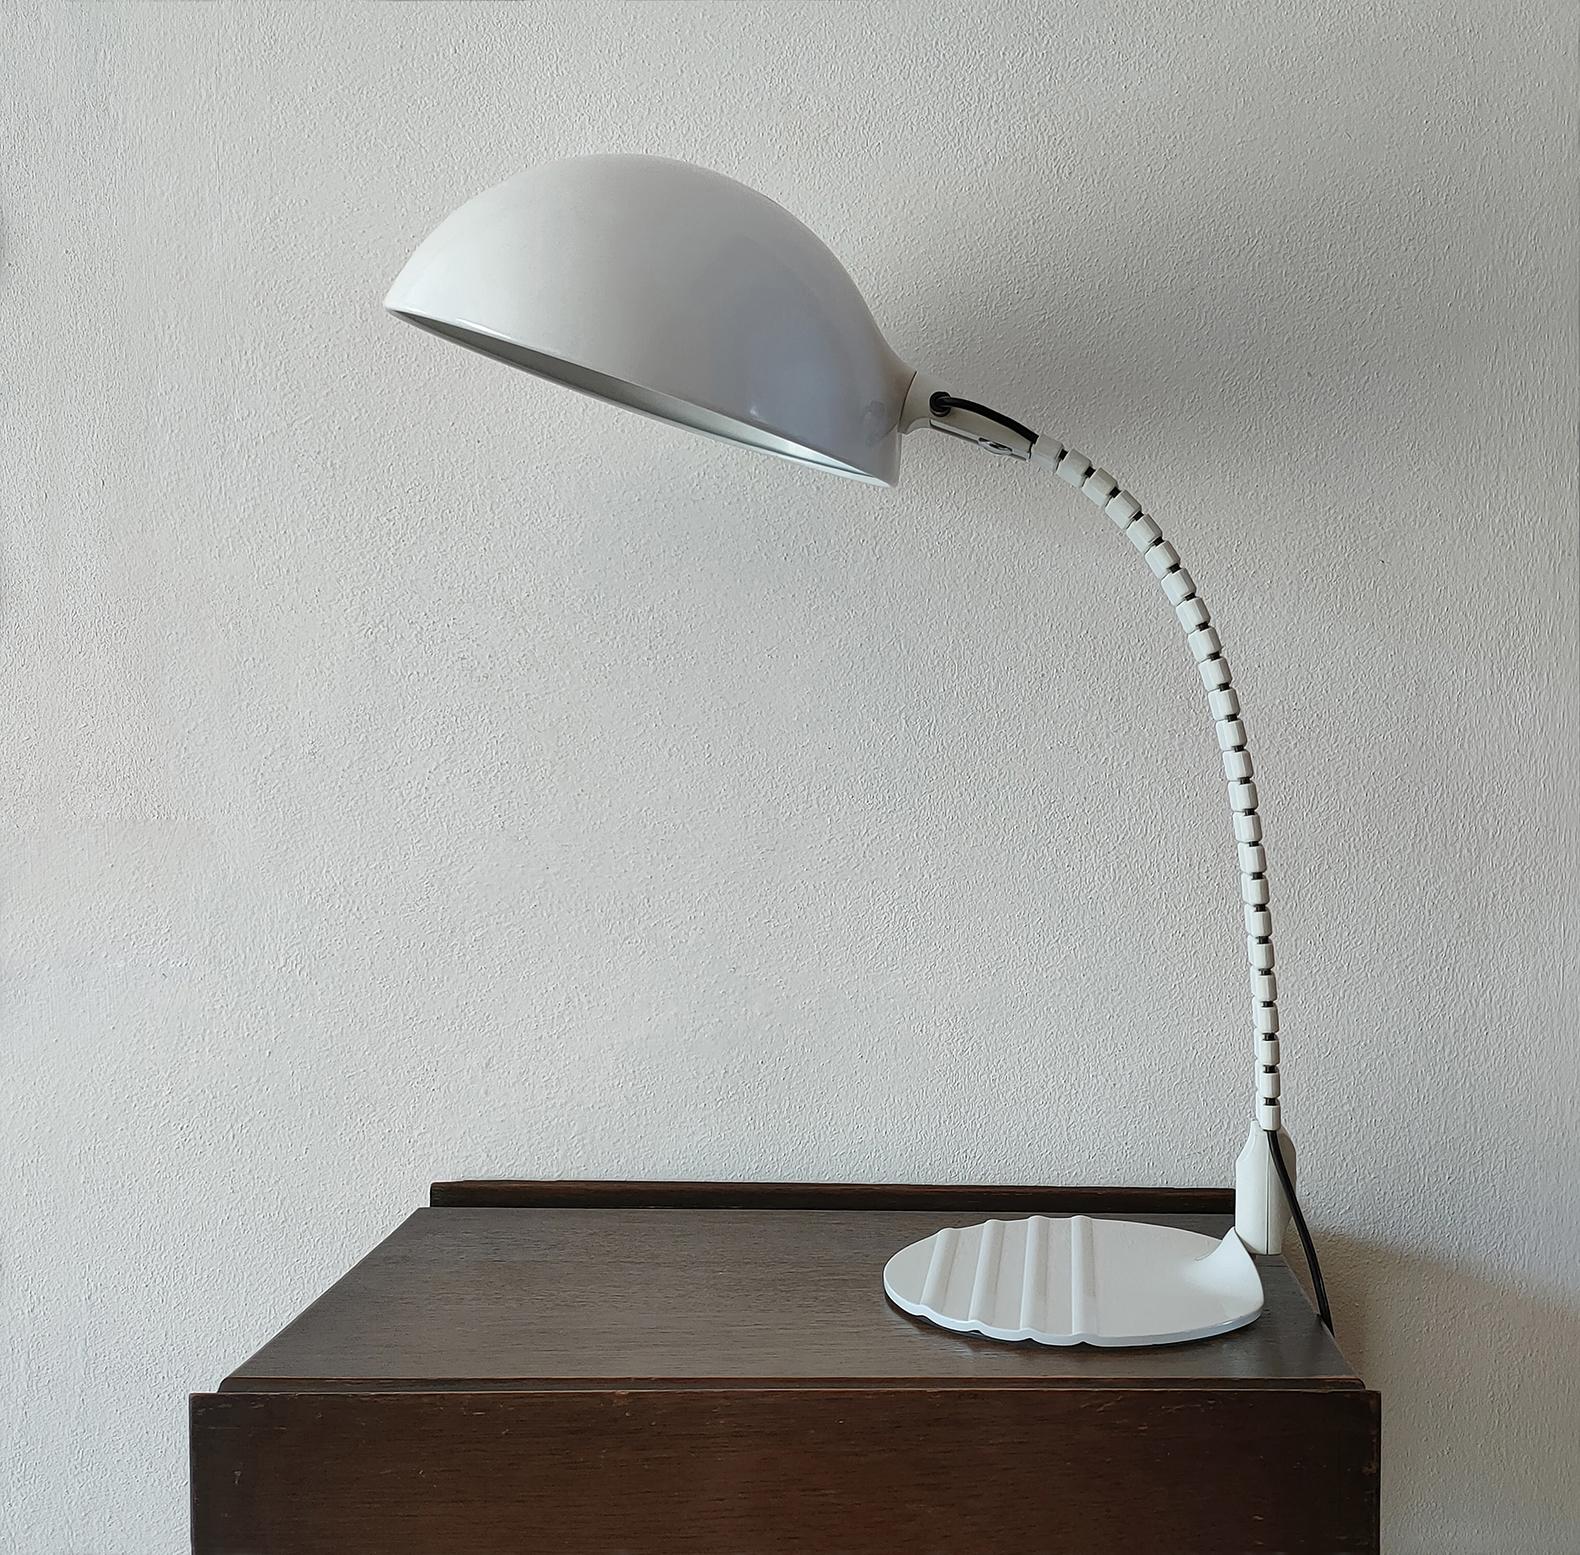 Mid-Century Modern Flex or 660 Table Lamp in White Metal and Resin by Martinelli Luce 1970s Italy For Sale